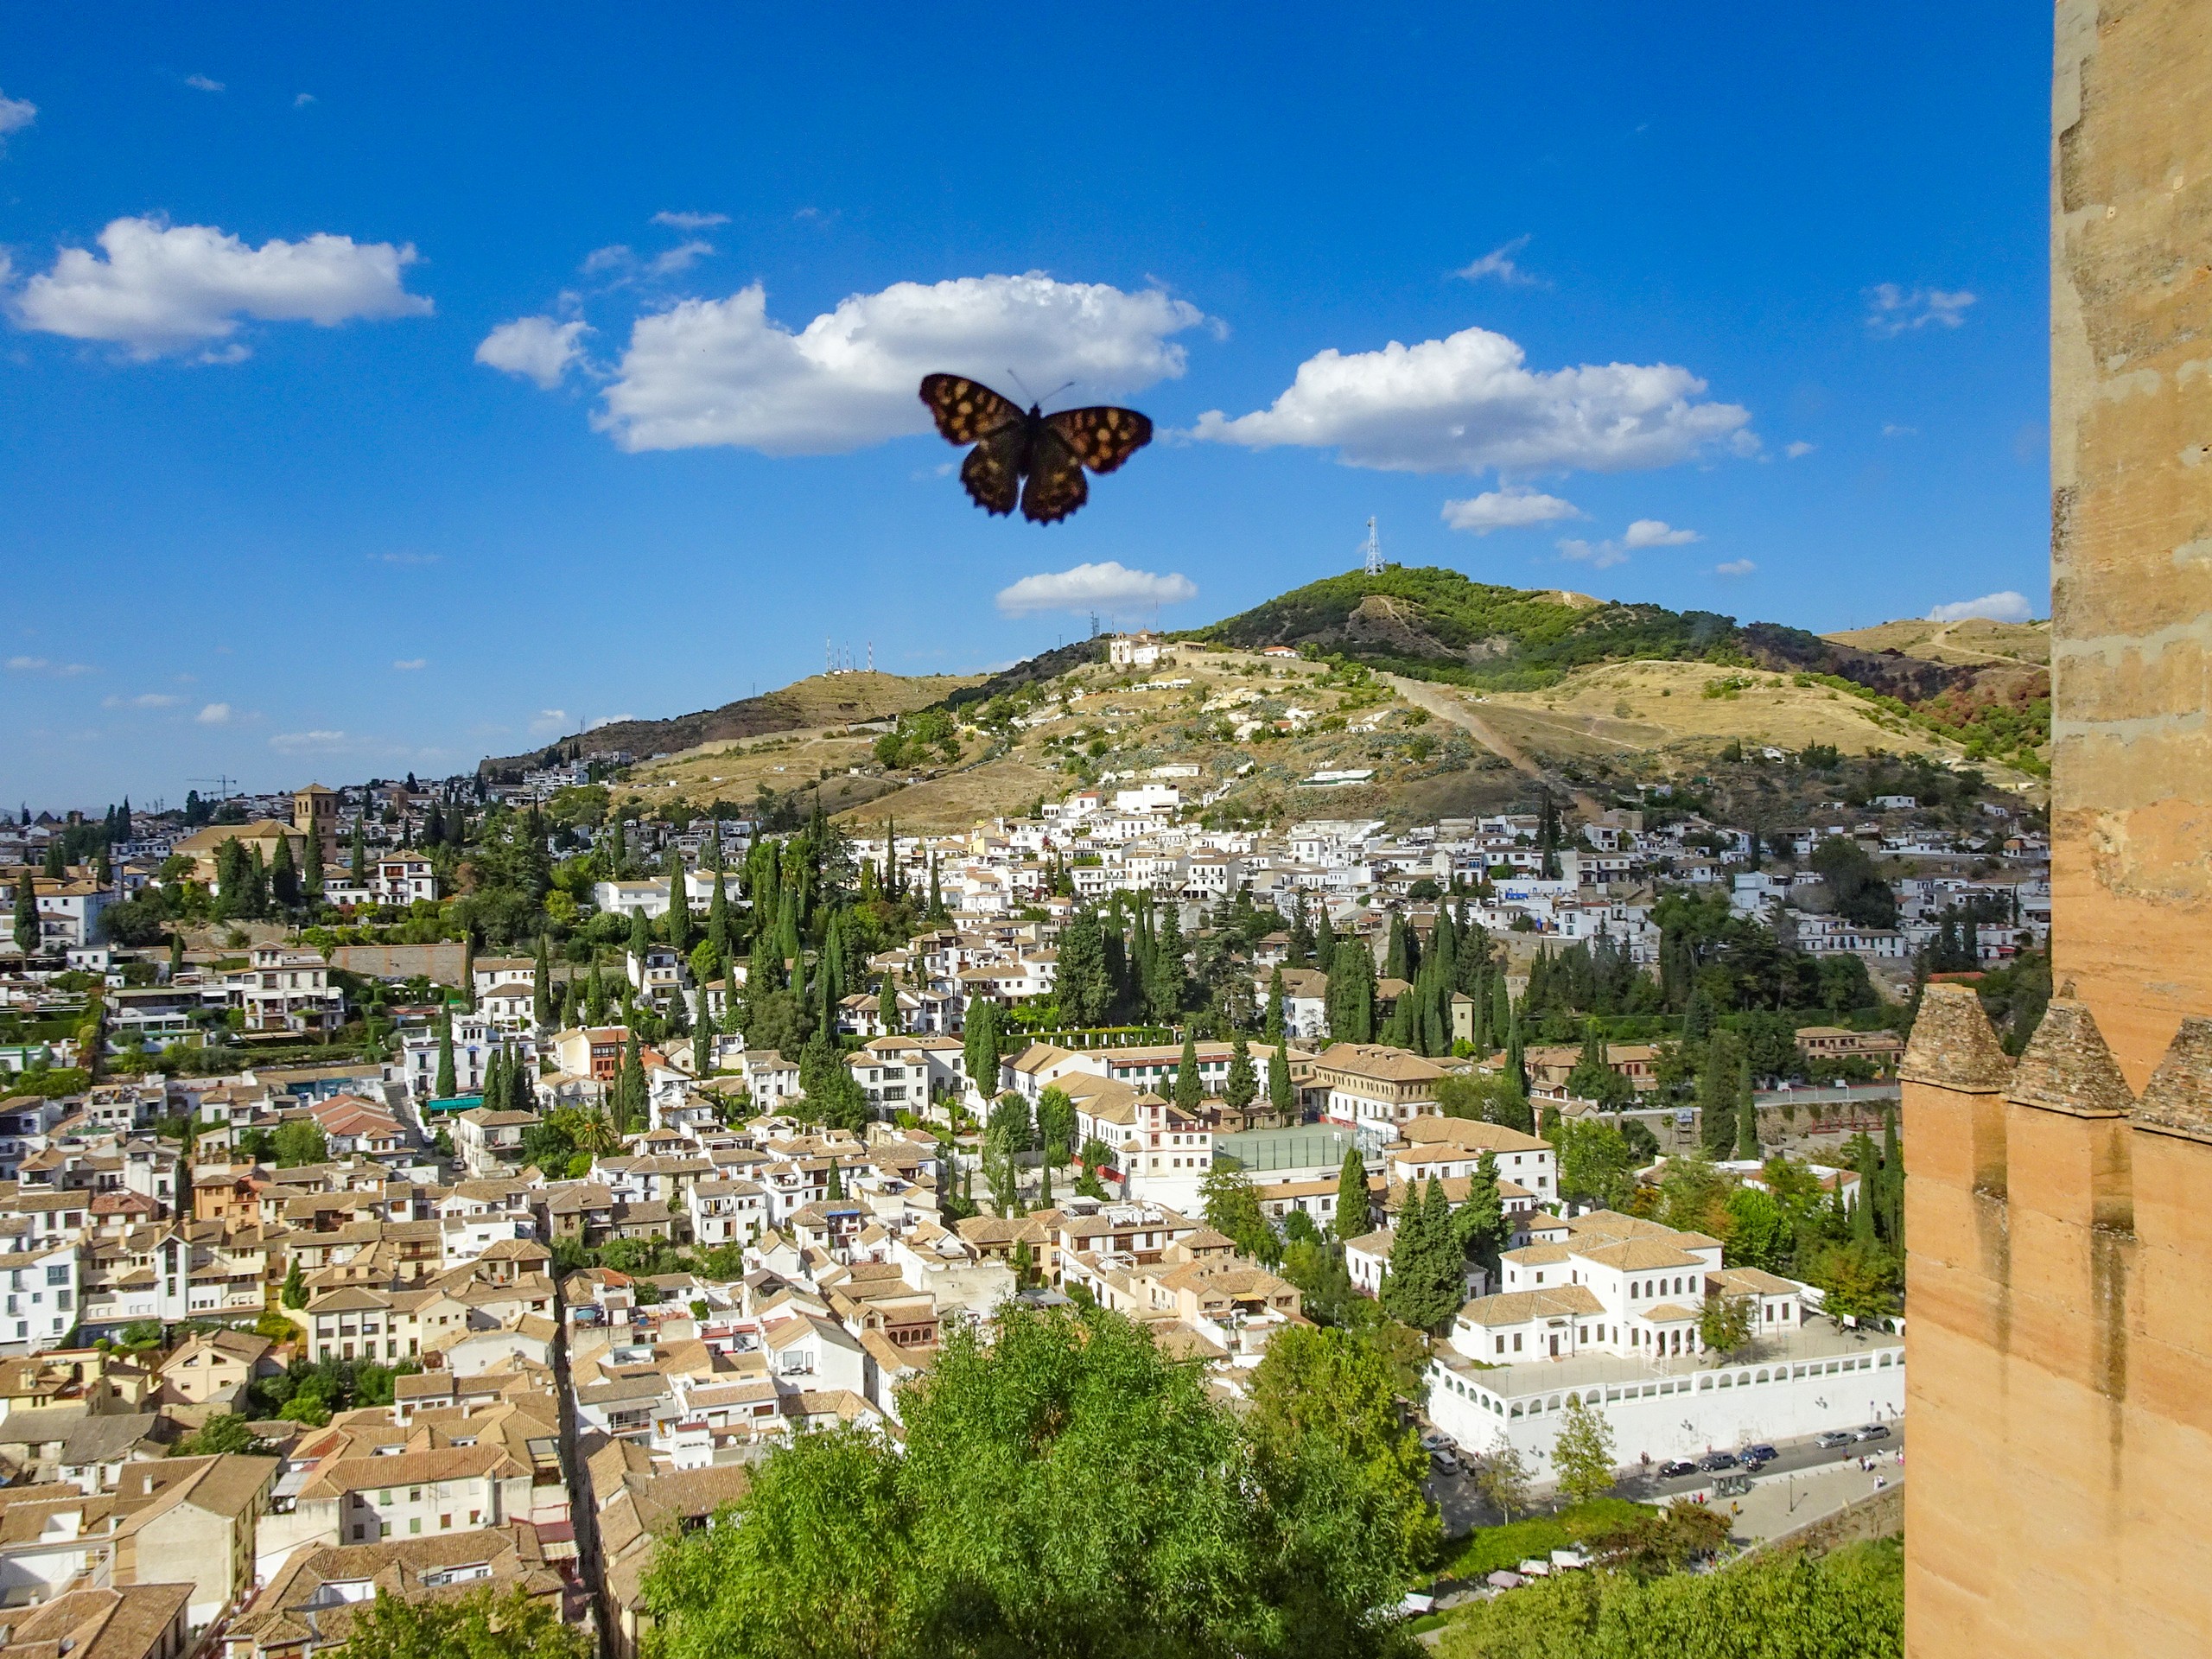 Butterfly and the beautiful landscape in Spain